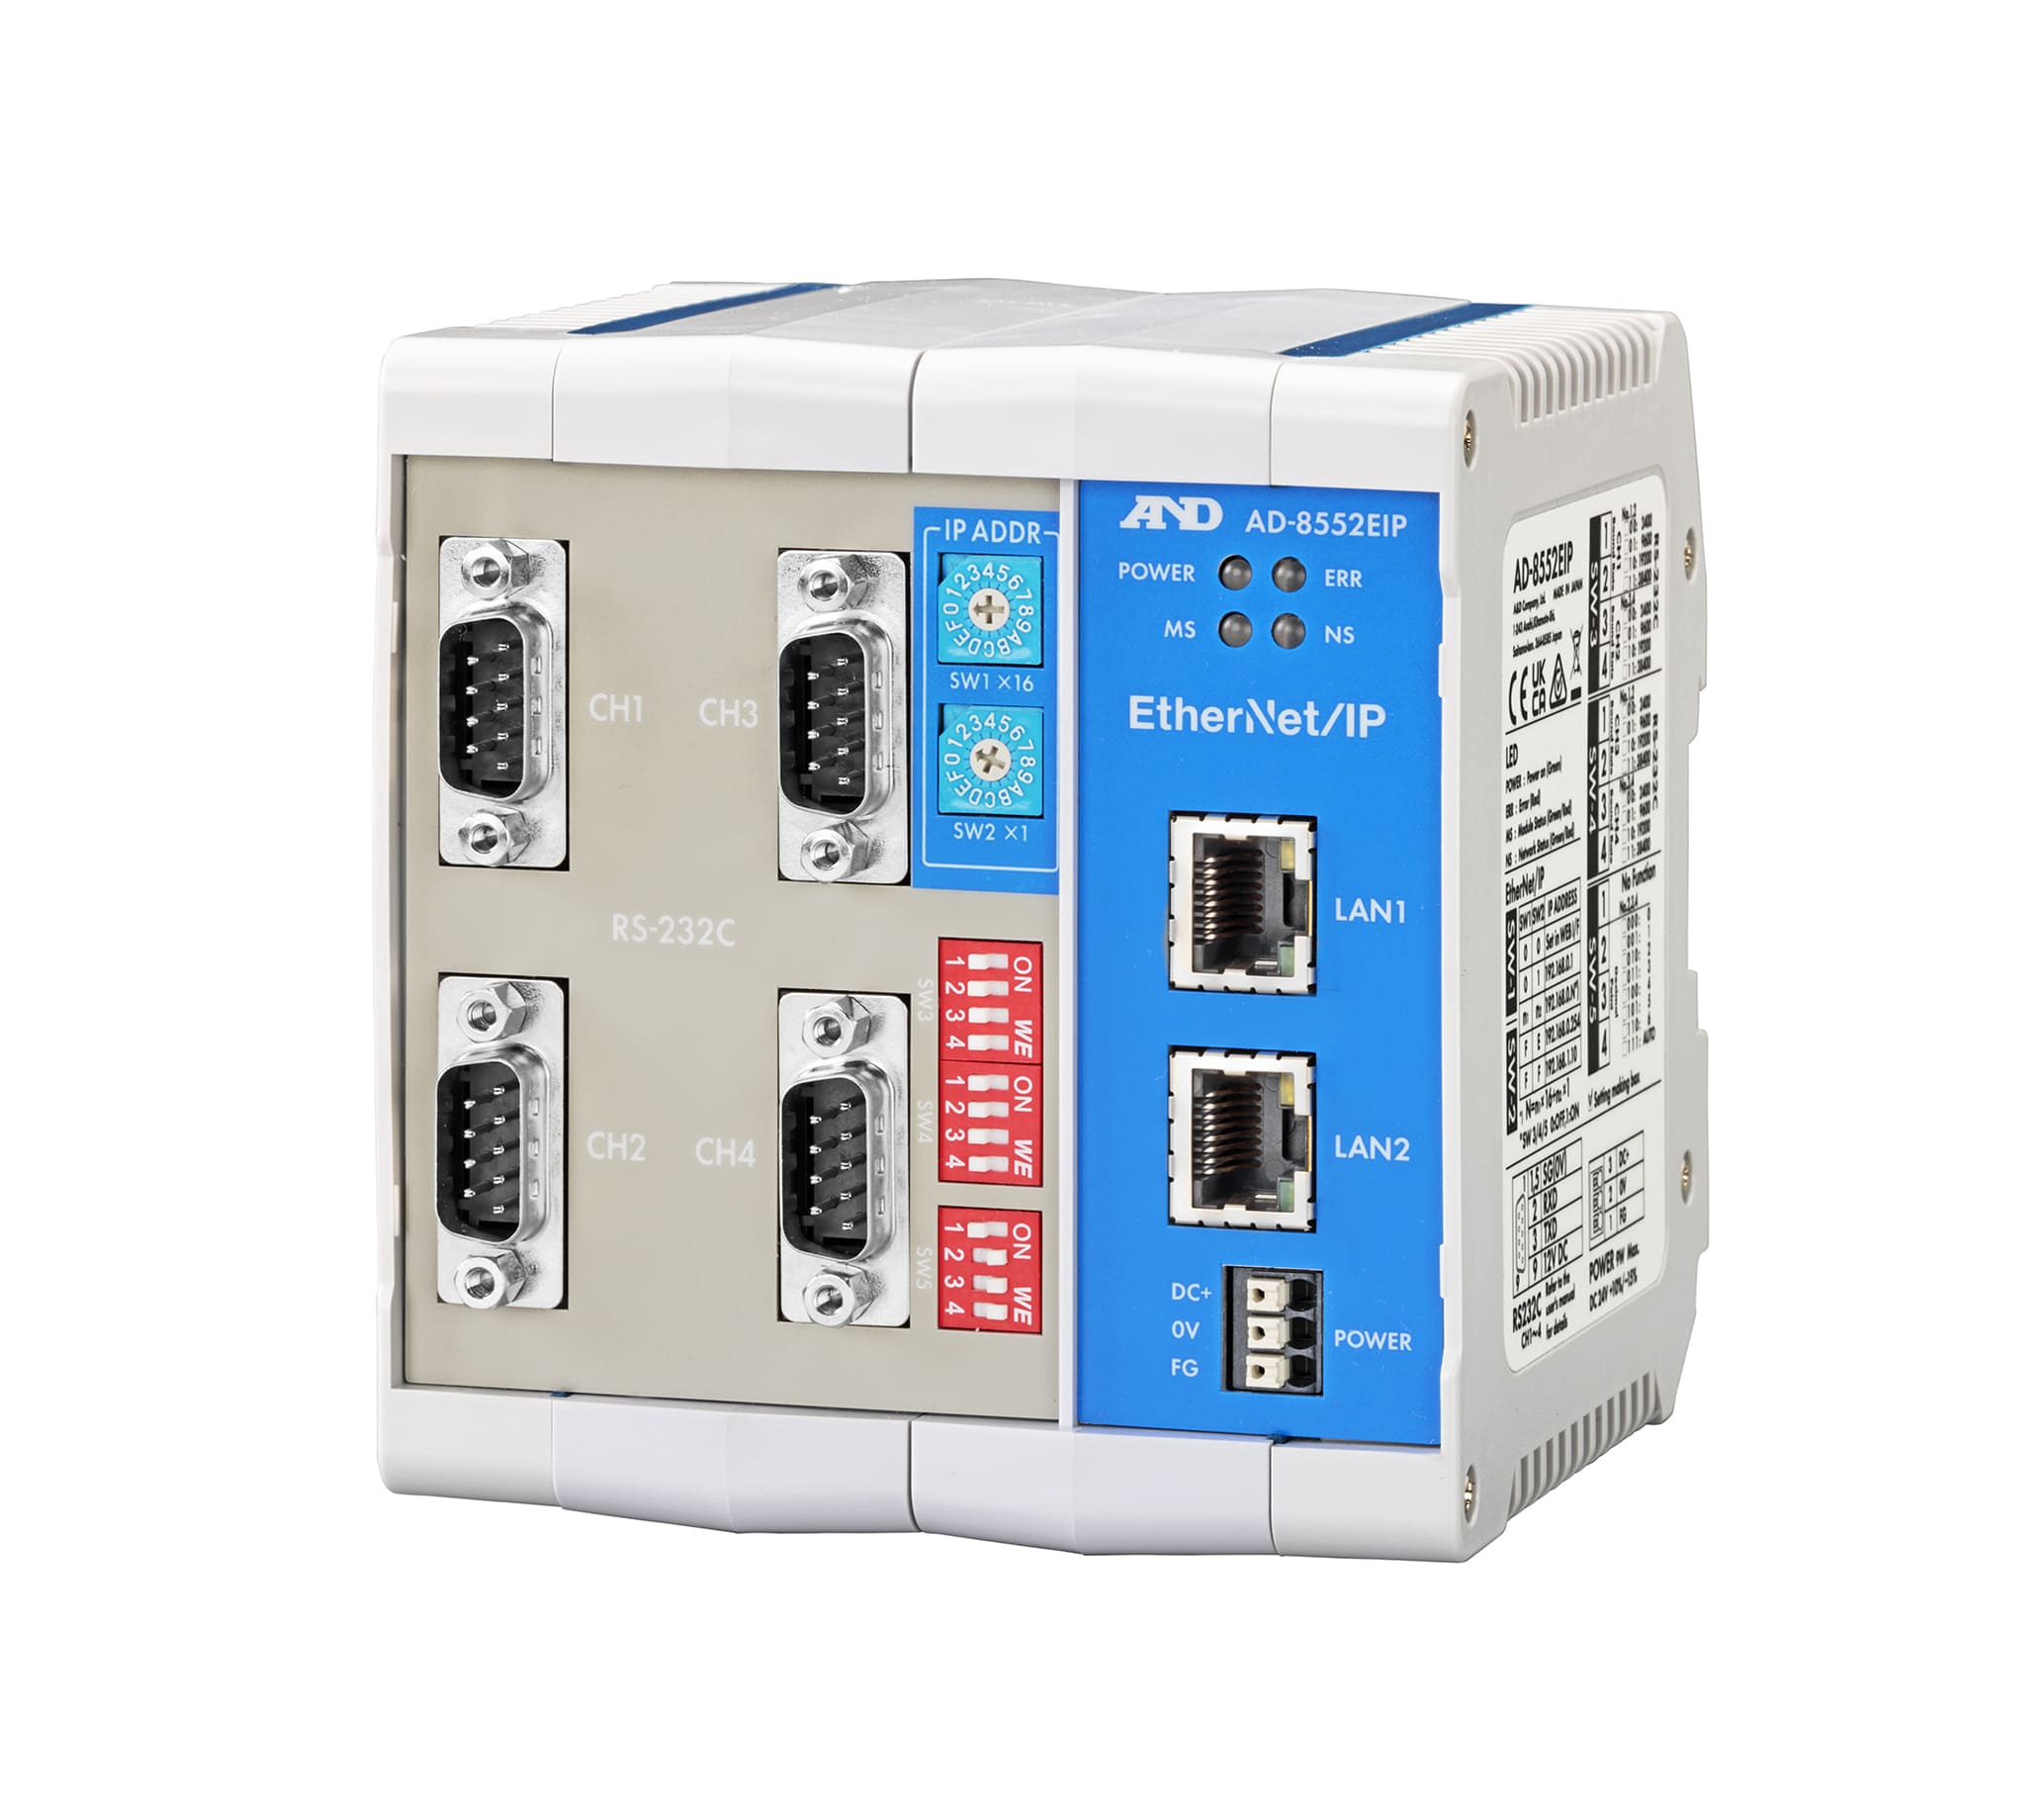 AD-8552EIP RS-232C to EtherNet/IP Converter